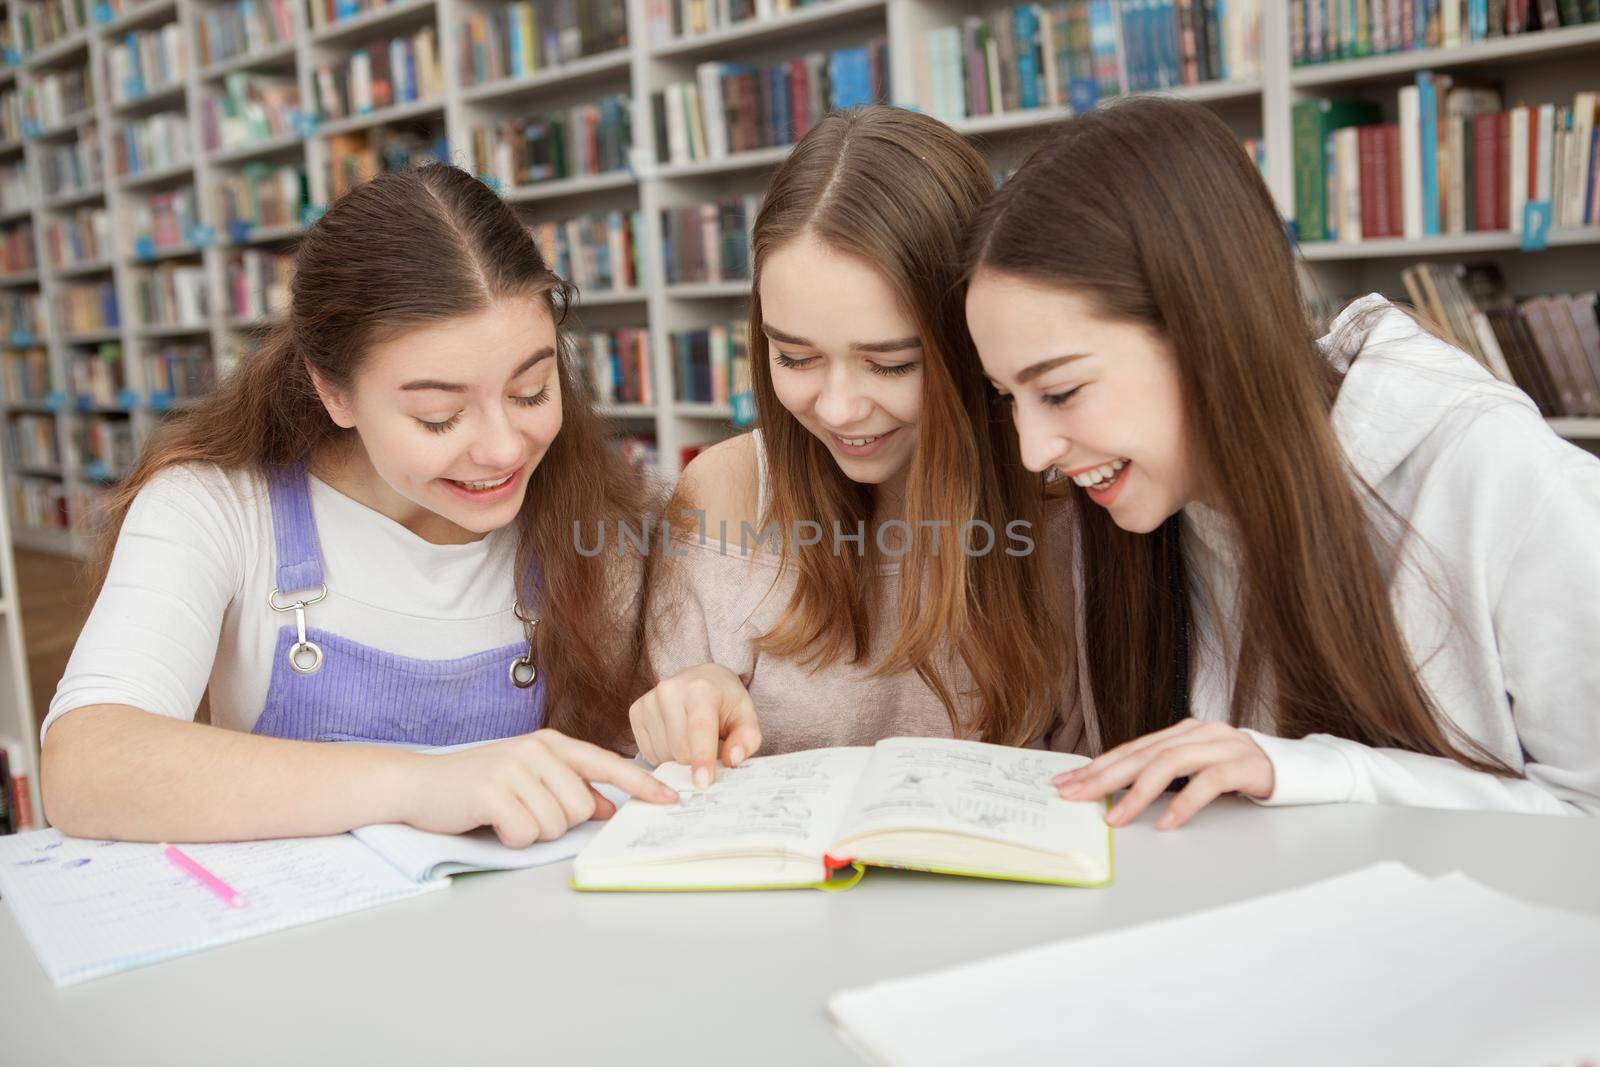 Cheerful teenage girls laughing while reading a book together at school library